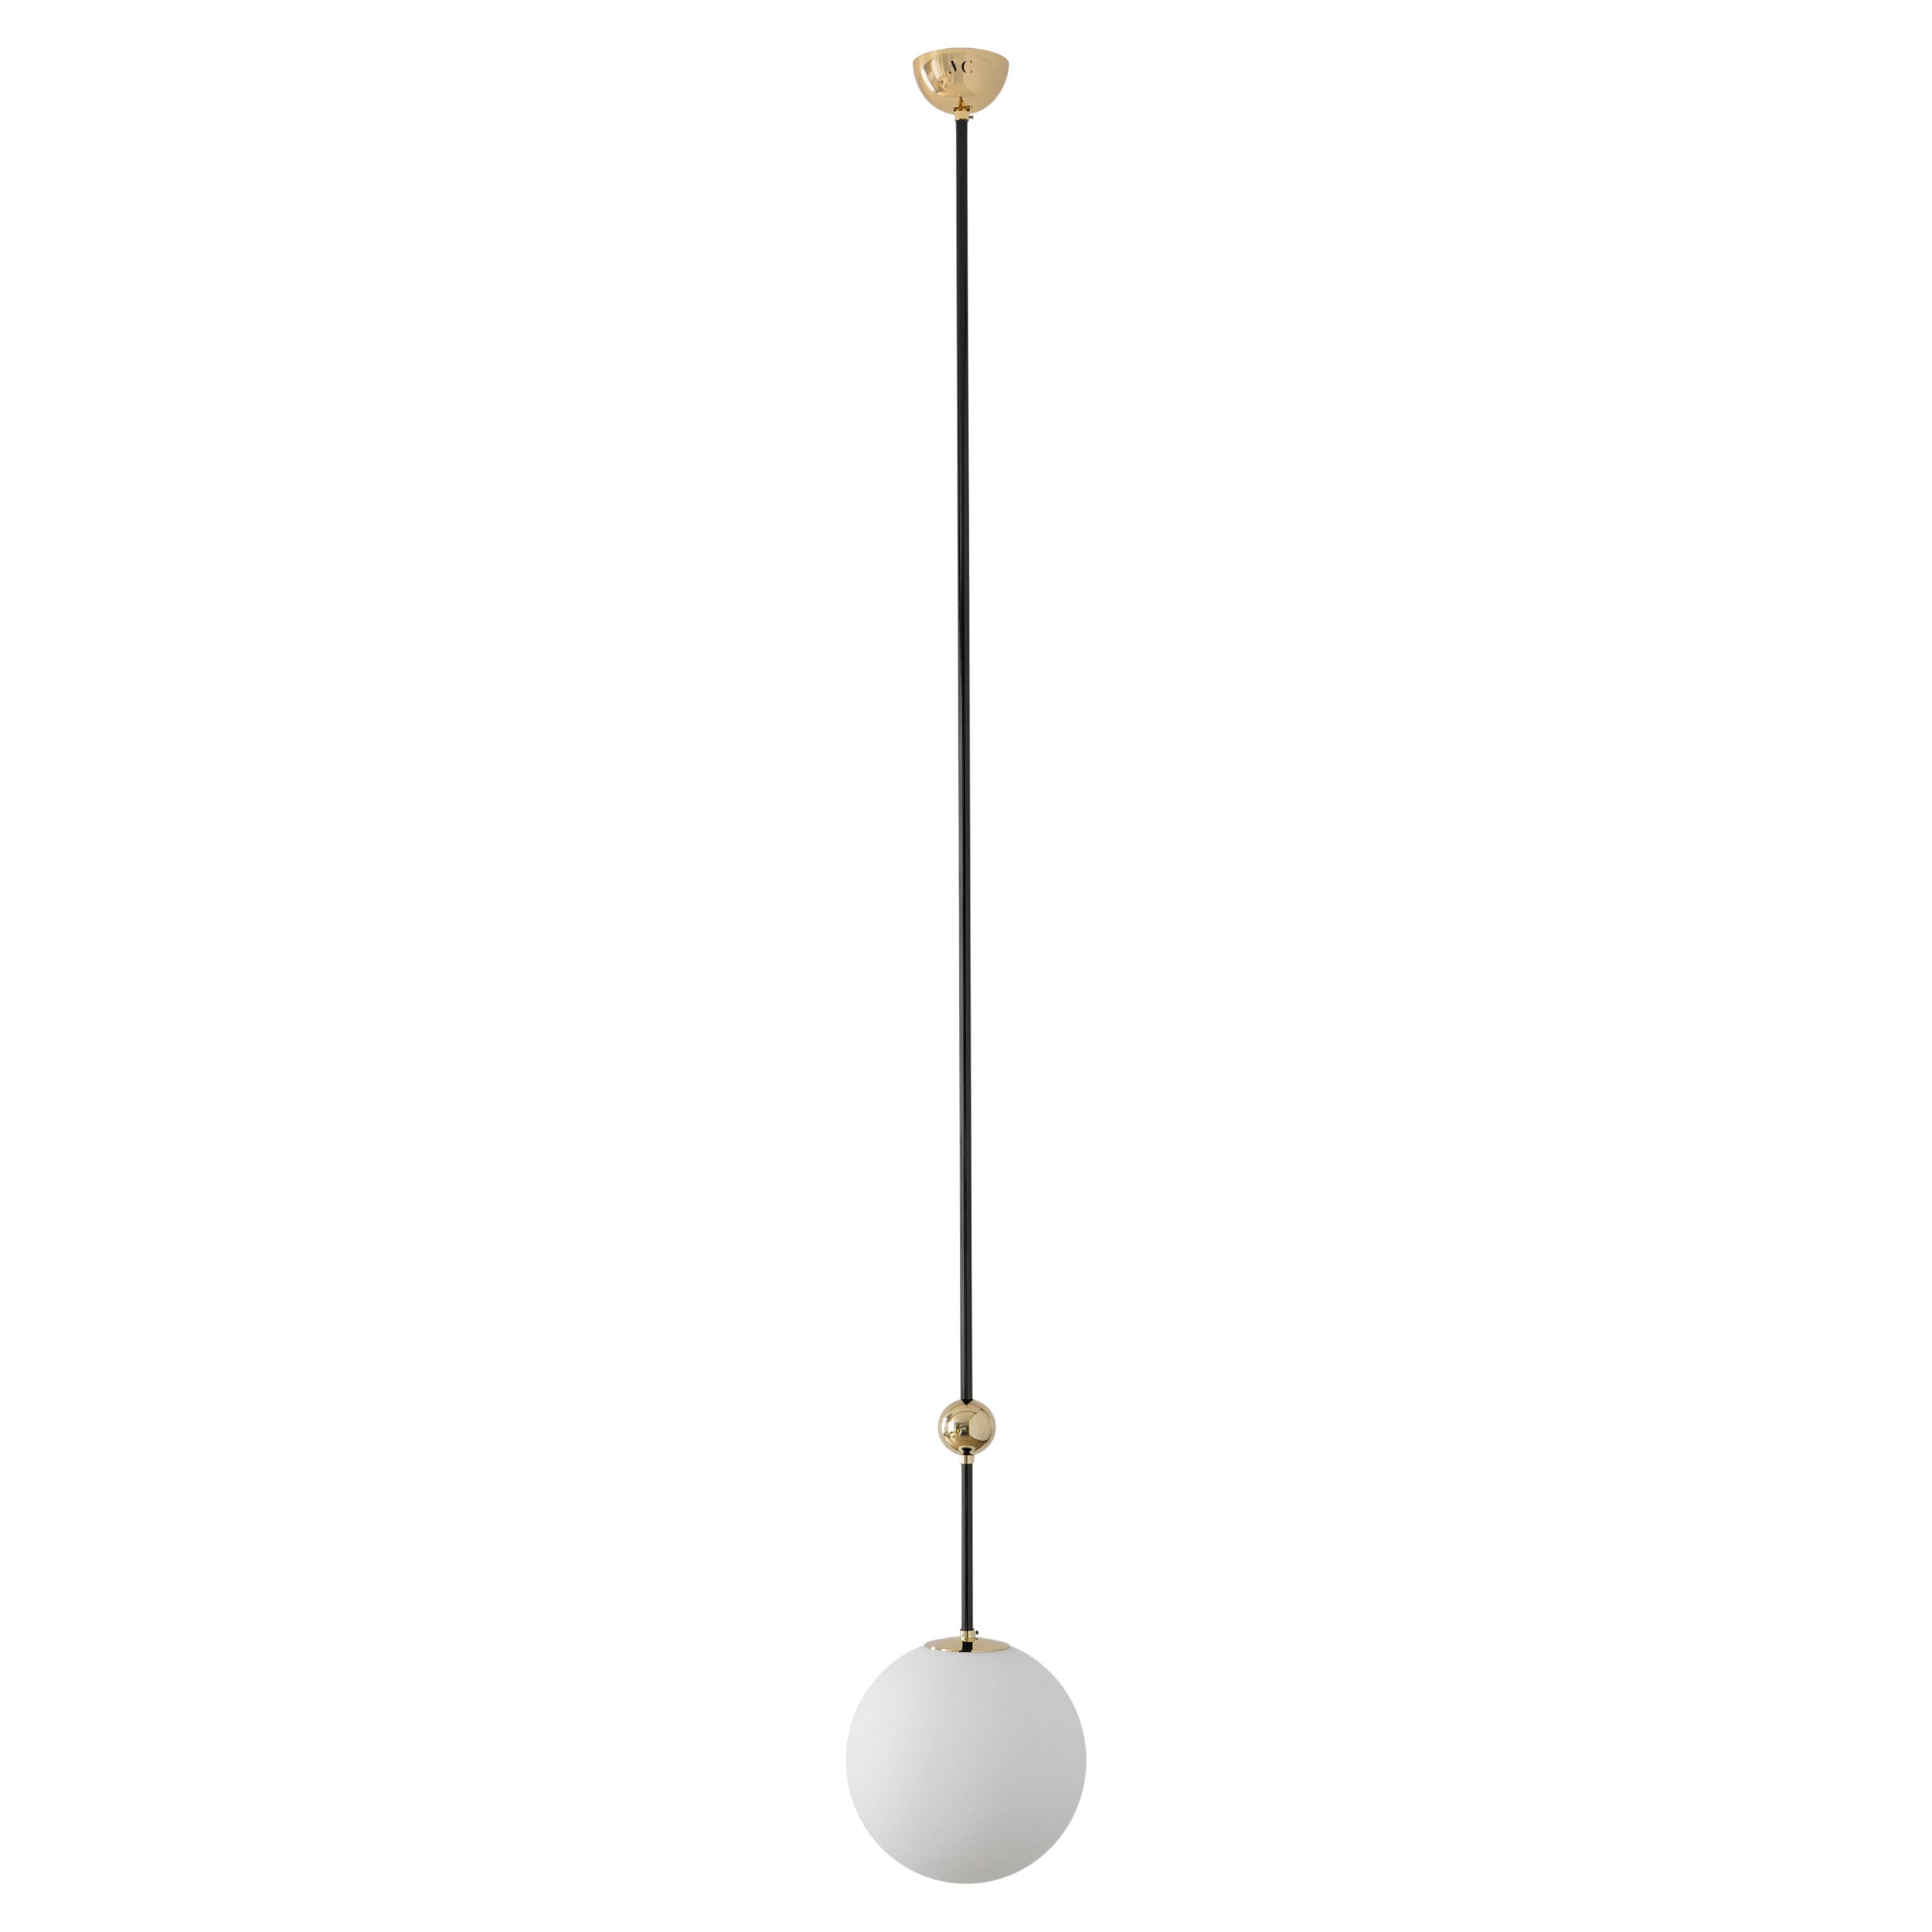 Pendant 02 by Magic Circus Editions
Dimensions: D 25 x W 25 x H 190 cm, also available in H 110, 130, 150, 175 cm
Materials: Brass, mouth blown glass

All our lamps can be wired according to each country. If sold to the USA it will be wired for